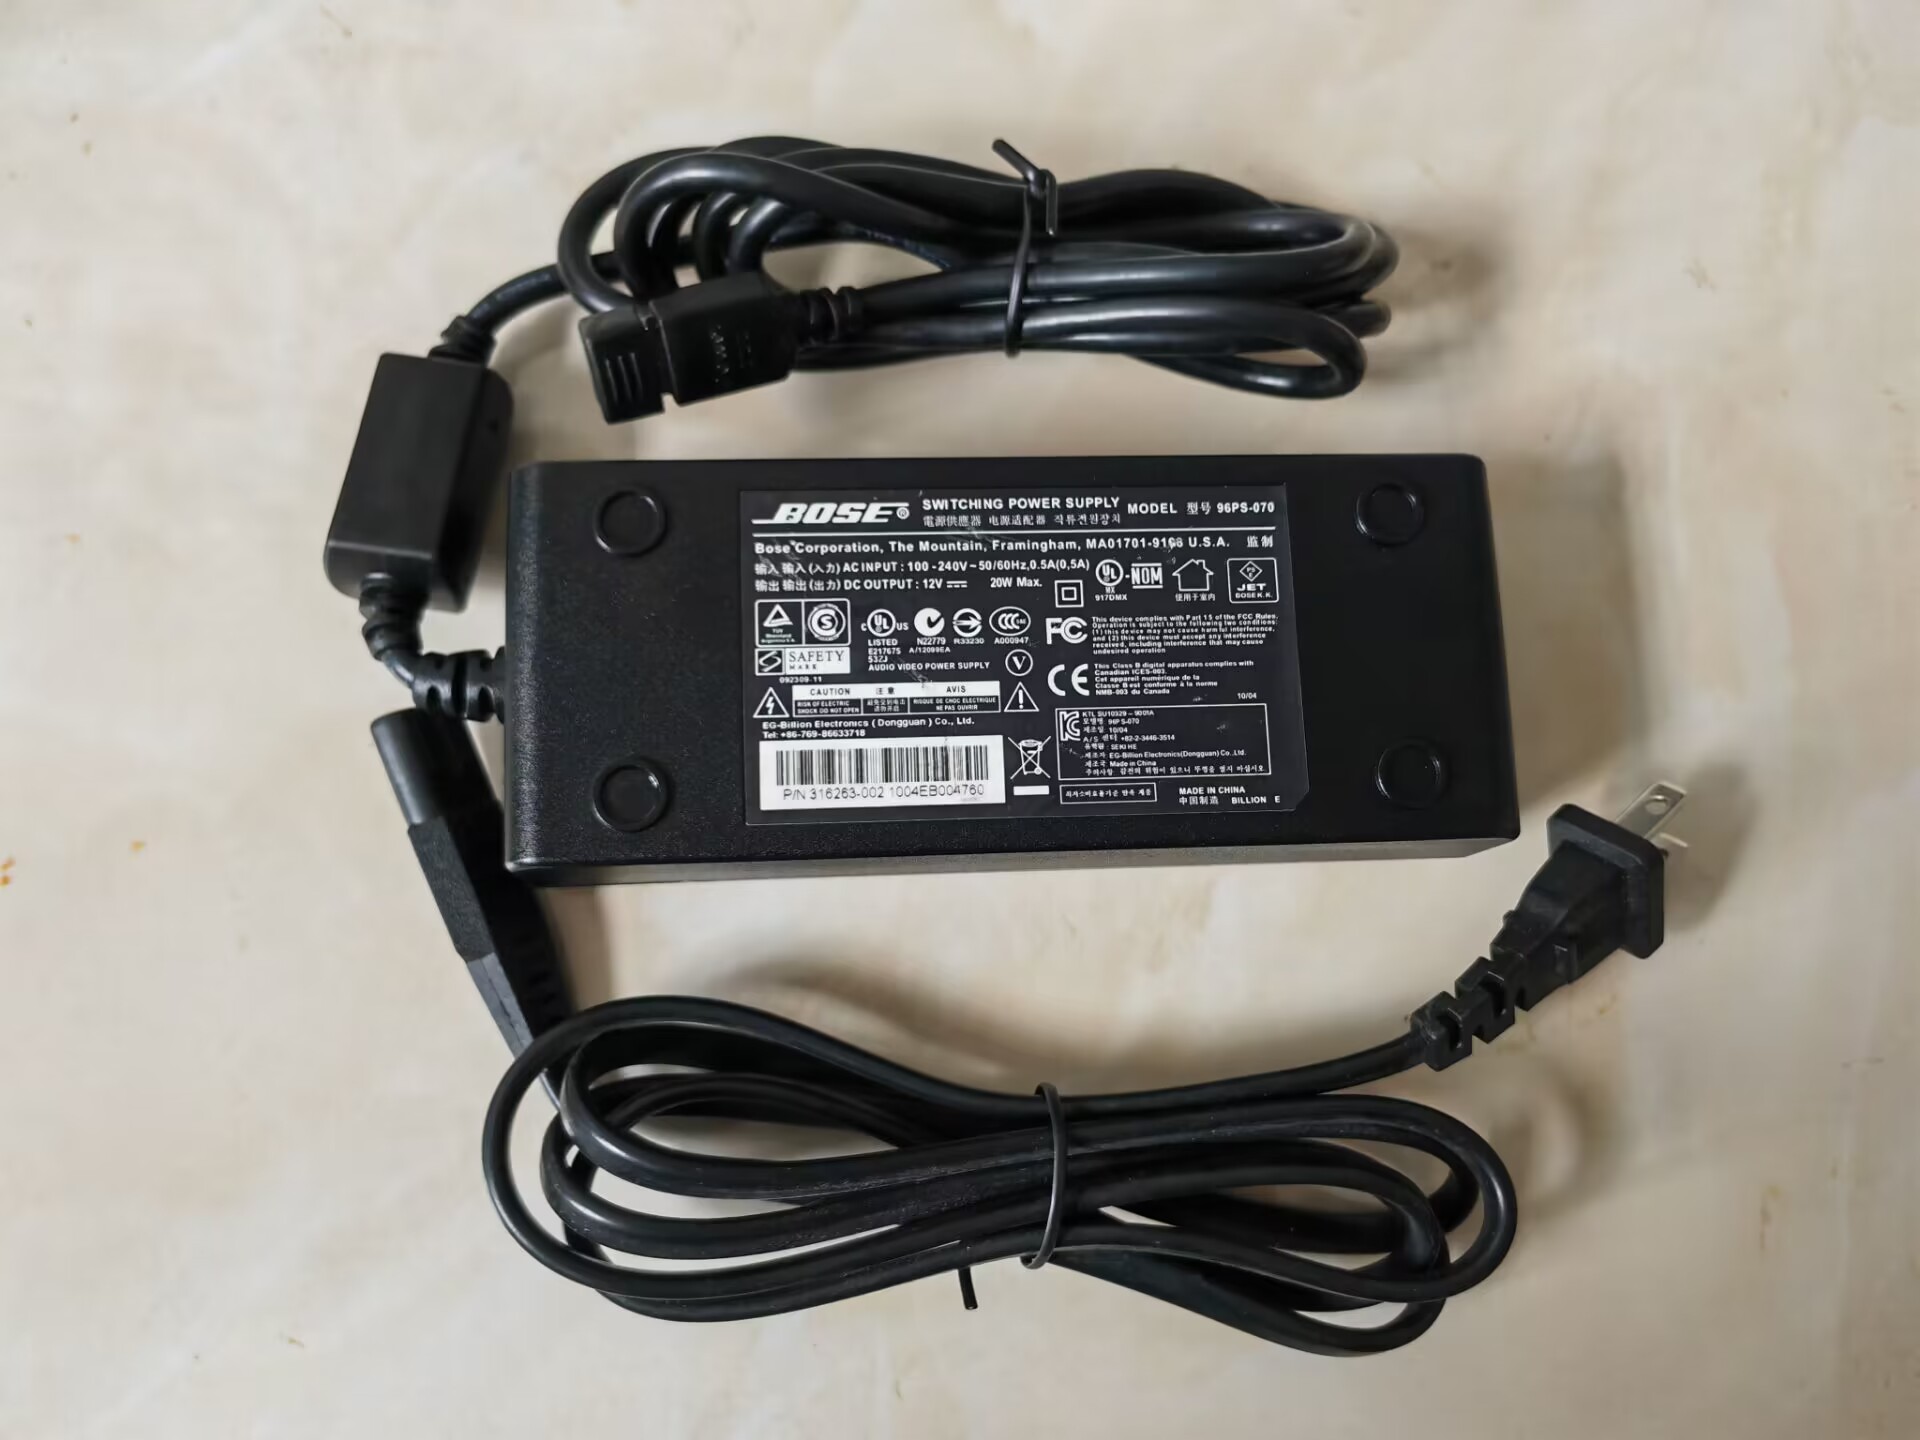 *Brand NEW* BOSE 96PS-070 12V 20W 0.5A AC DC ADAPTHE POWER Supply